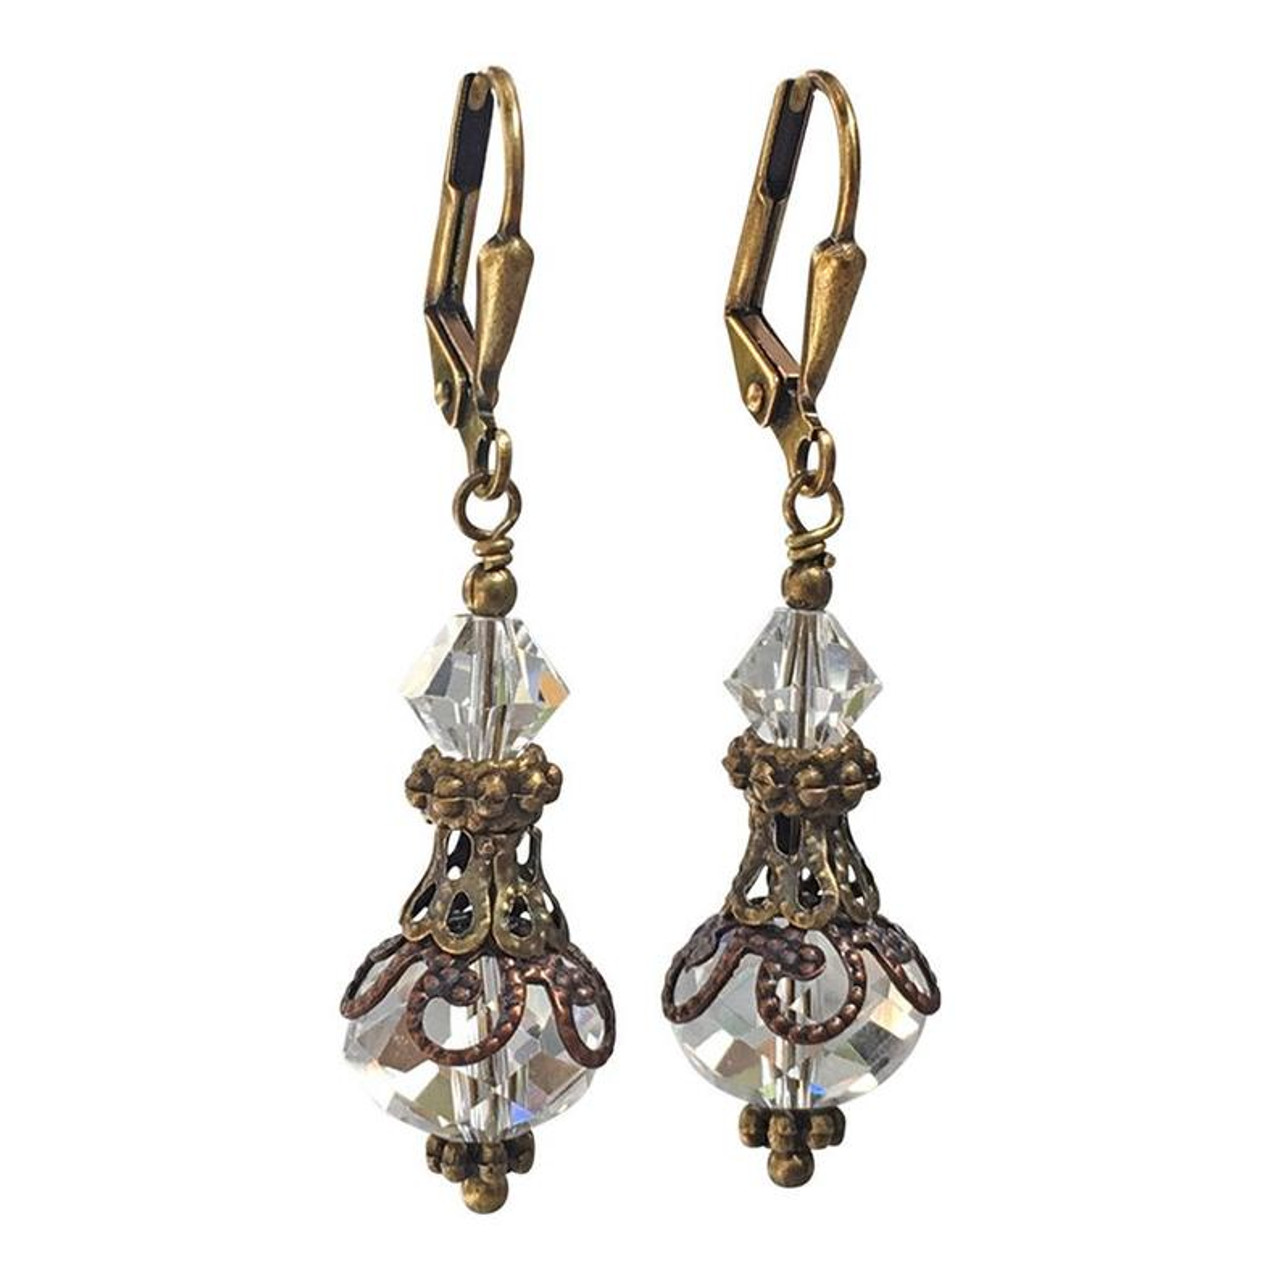 Vintage Bronze Crystal Dangle Earrings for Women with Jewelry Gift Box